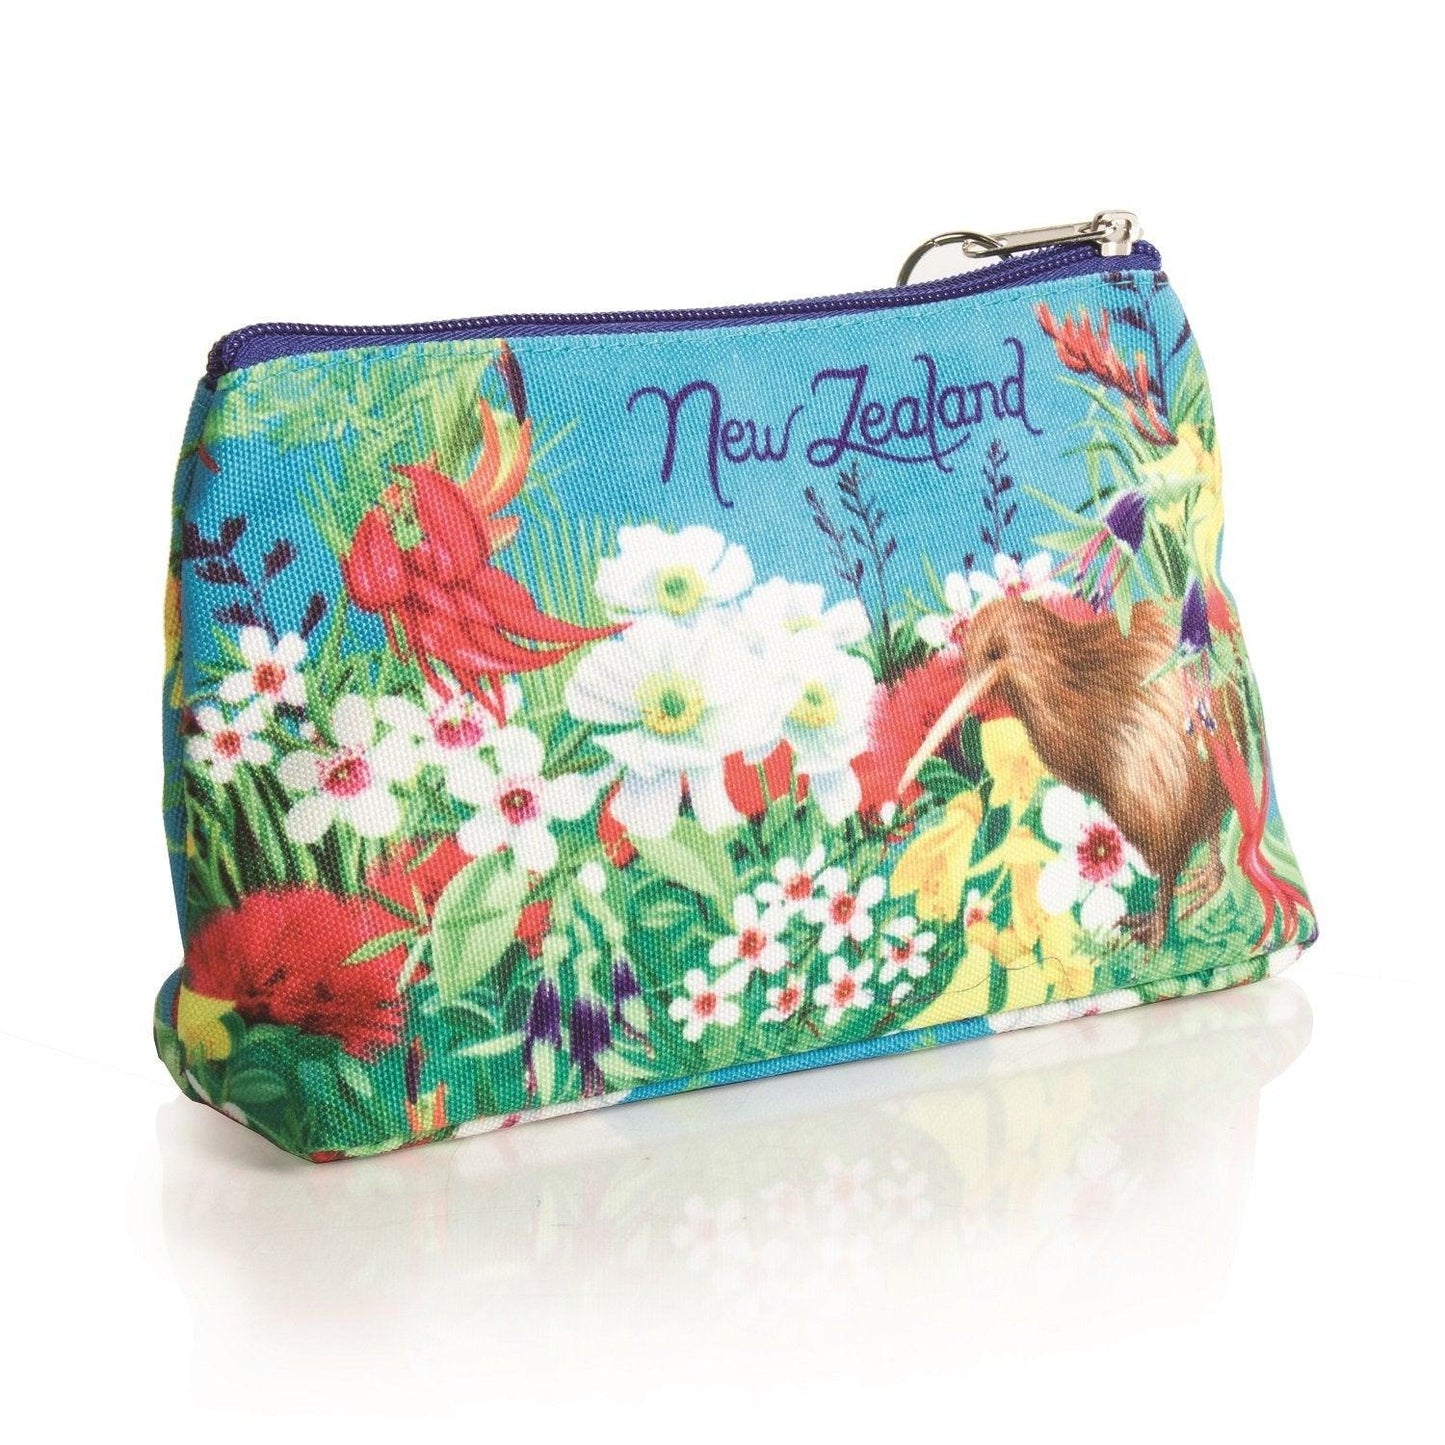 New Zealand nature pouch bag.